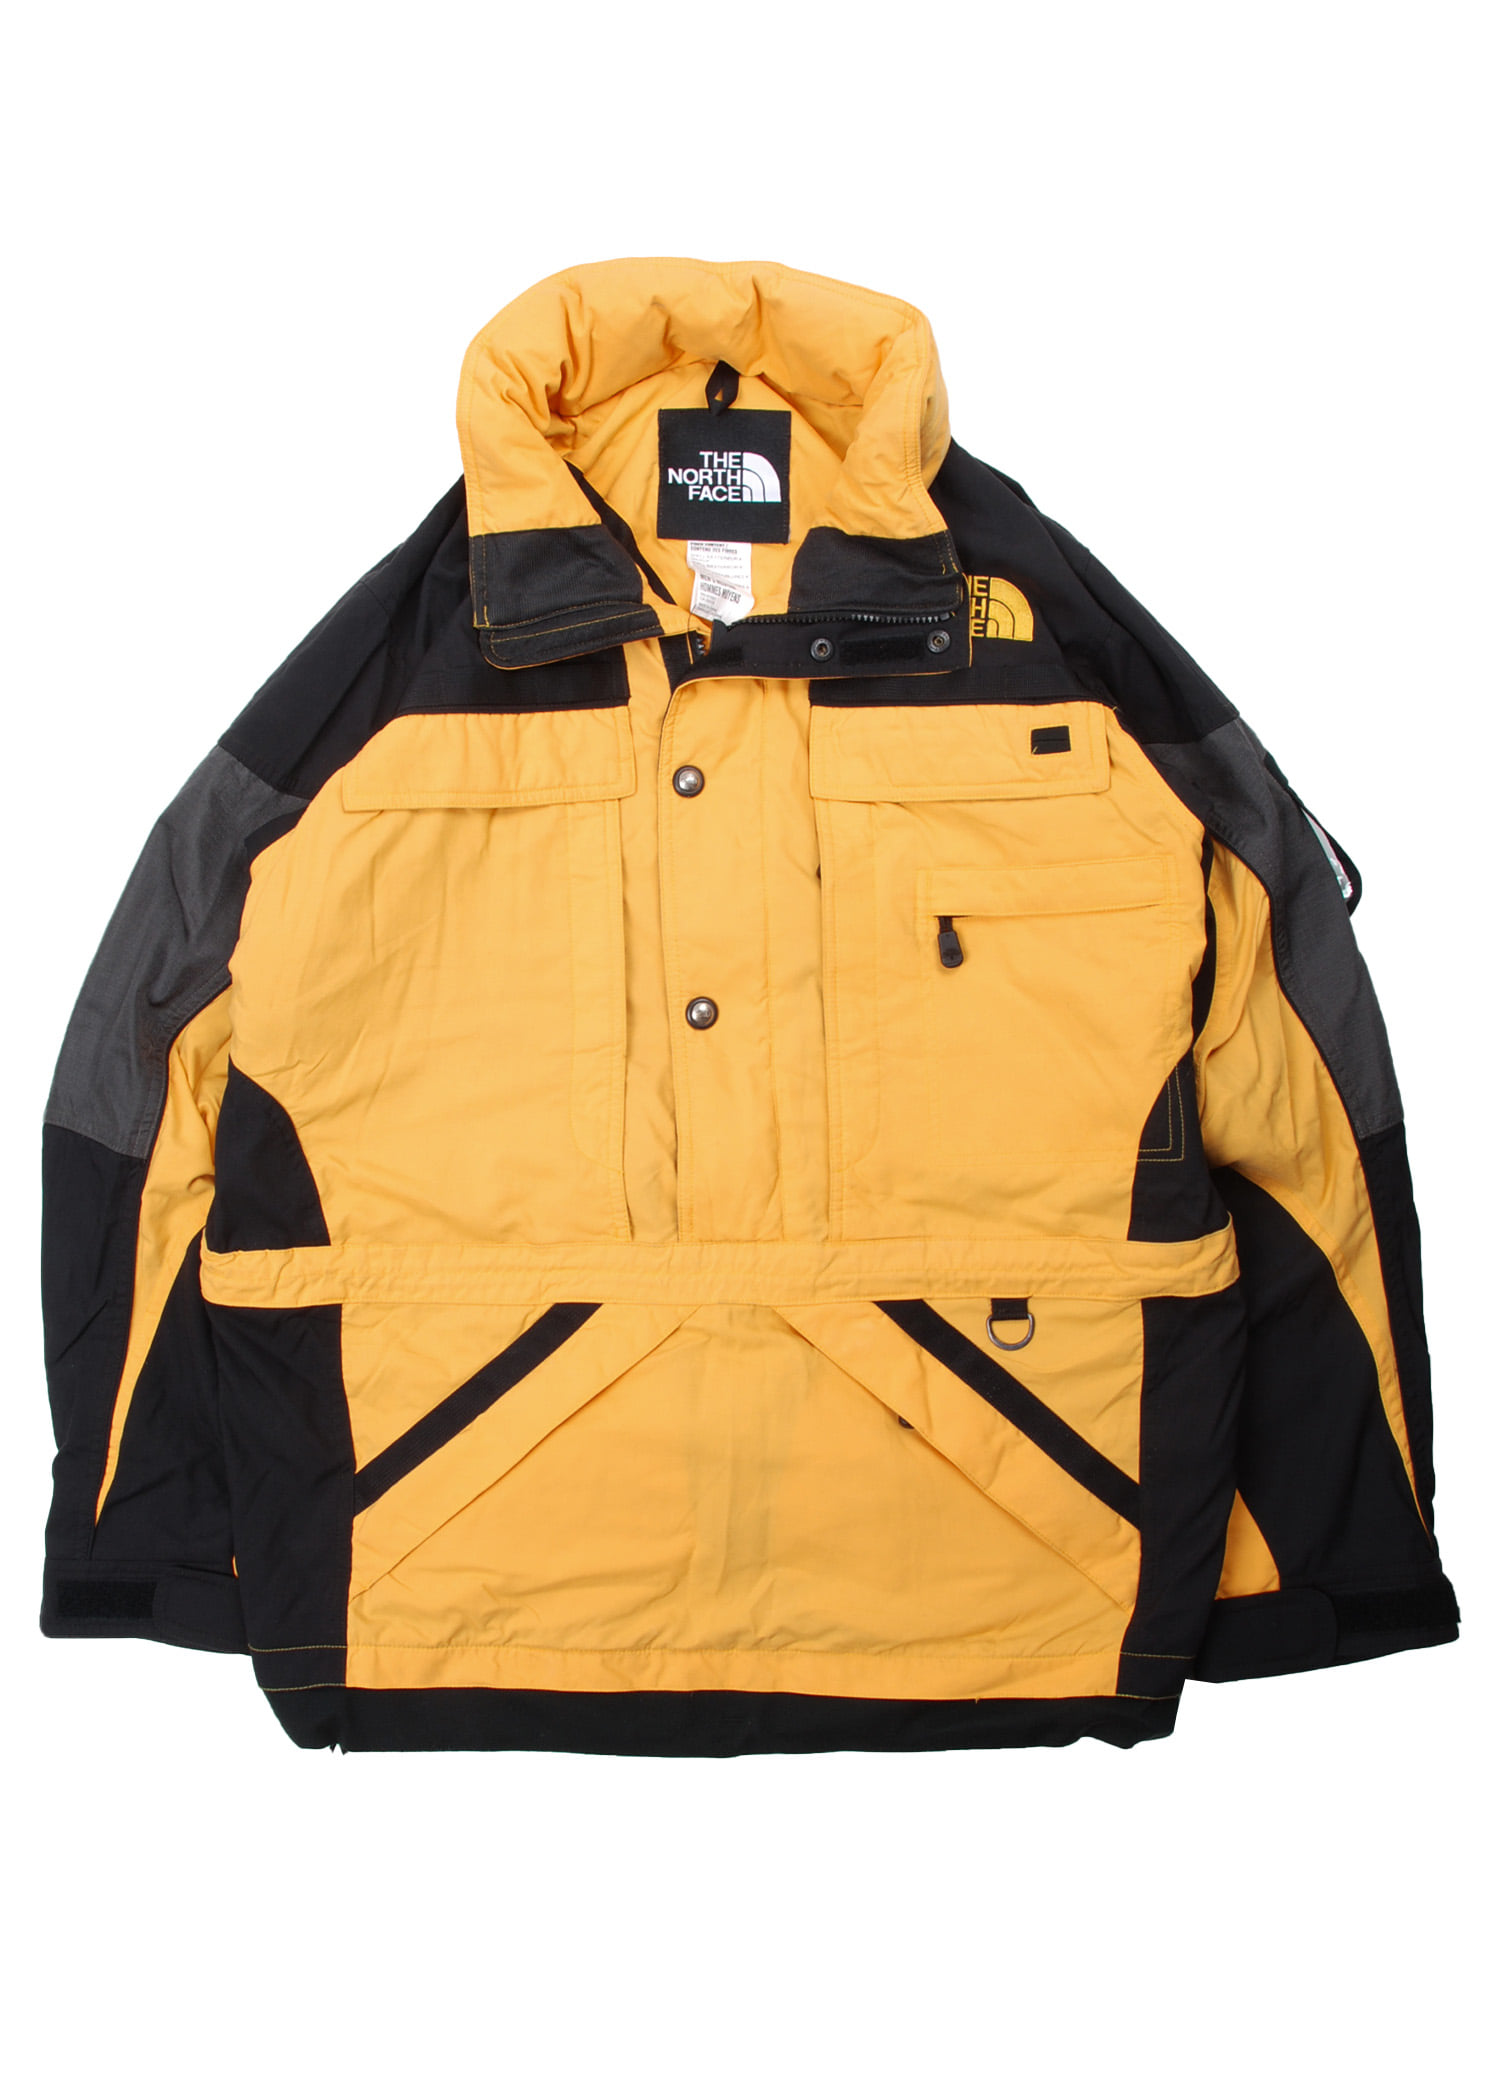 THE NORTH FACE EXTREME GEAR anorak parka